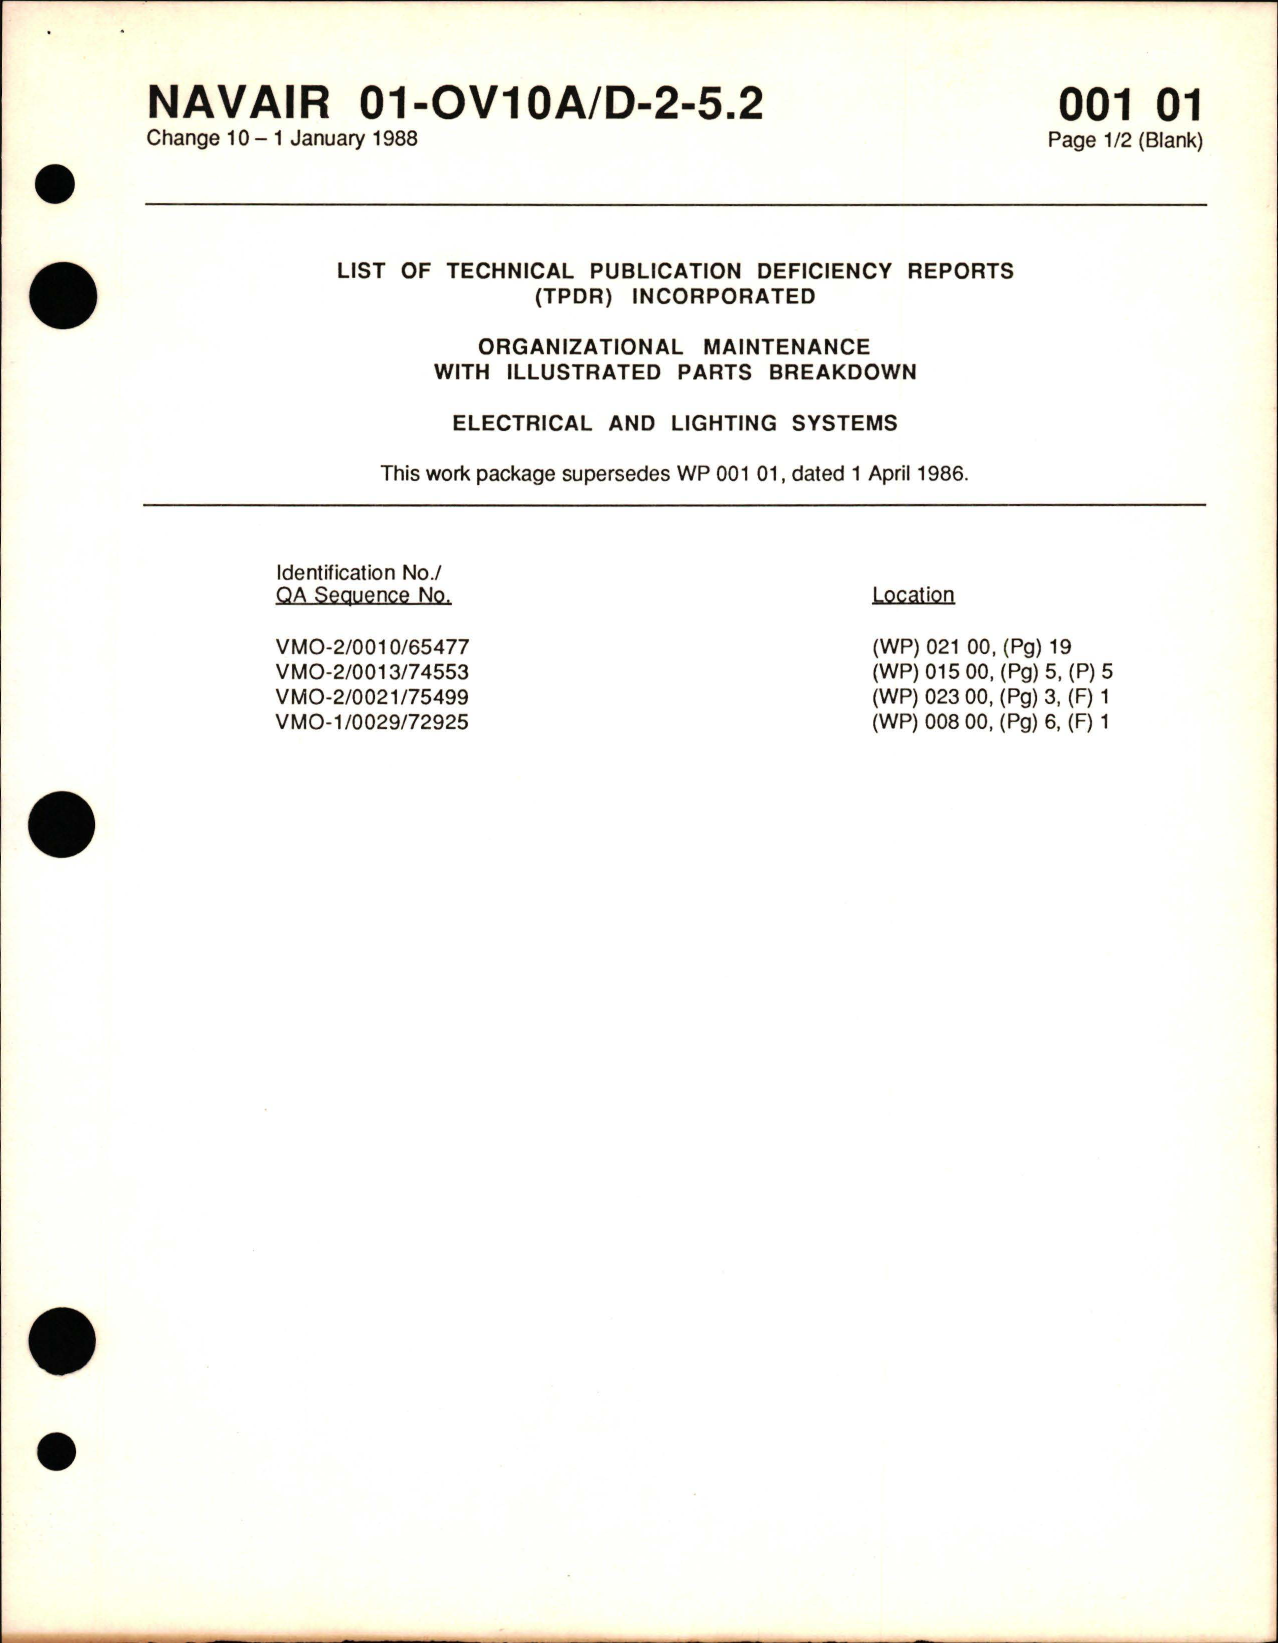 Sample page 9 from AirCorps Library document: Organizational Maintenance with Illustrated Parts Breakdown for Electrical and Lighting Systems for OV-10A/D